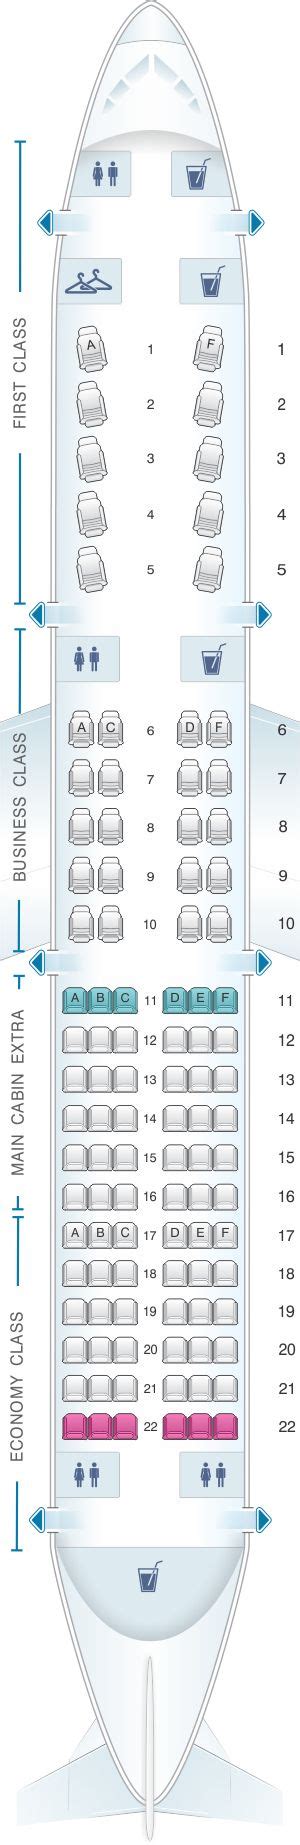 Seat Map American Airlines Airbus A321 Transcontinental American